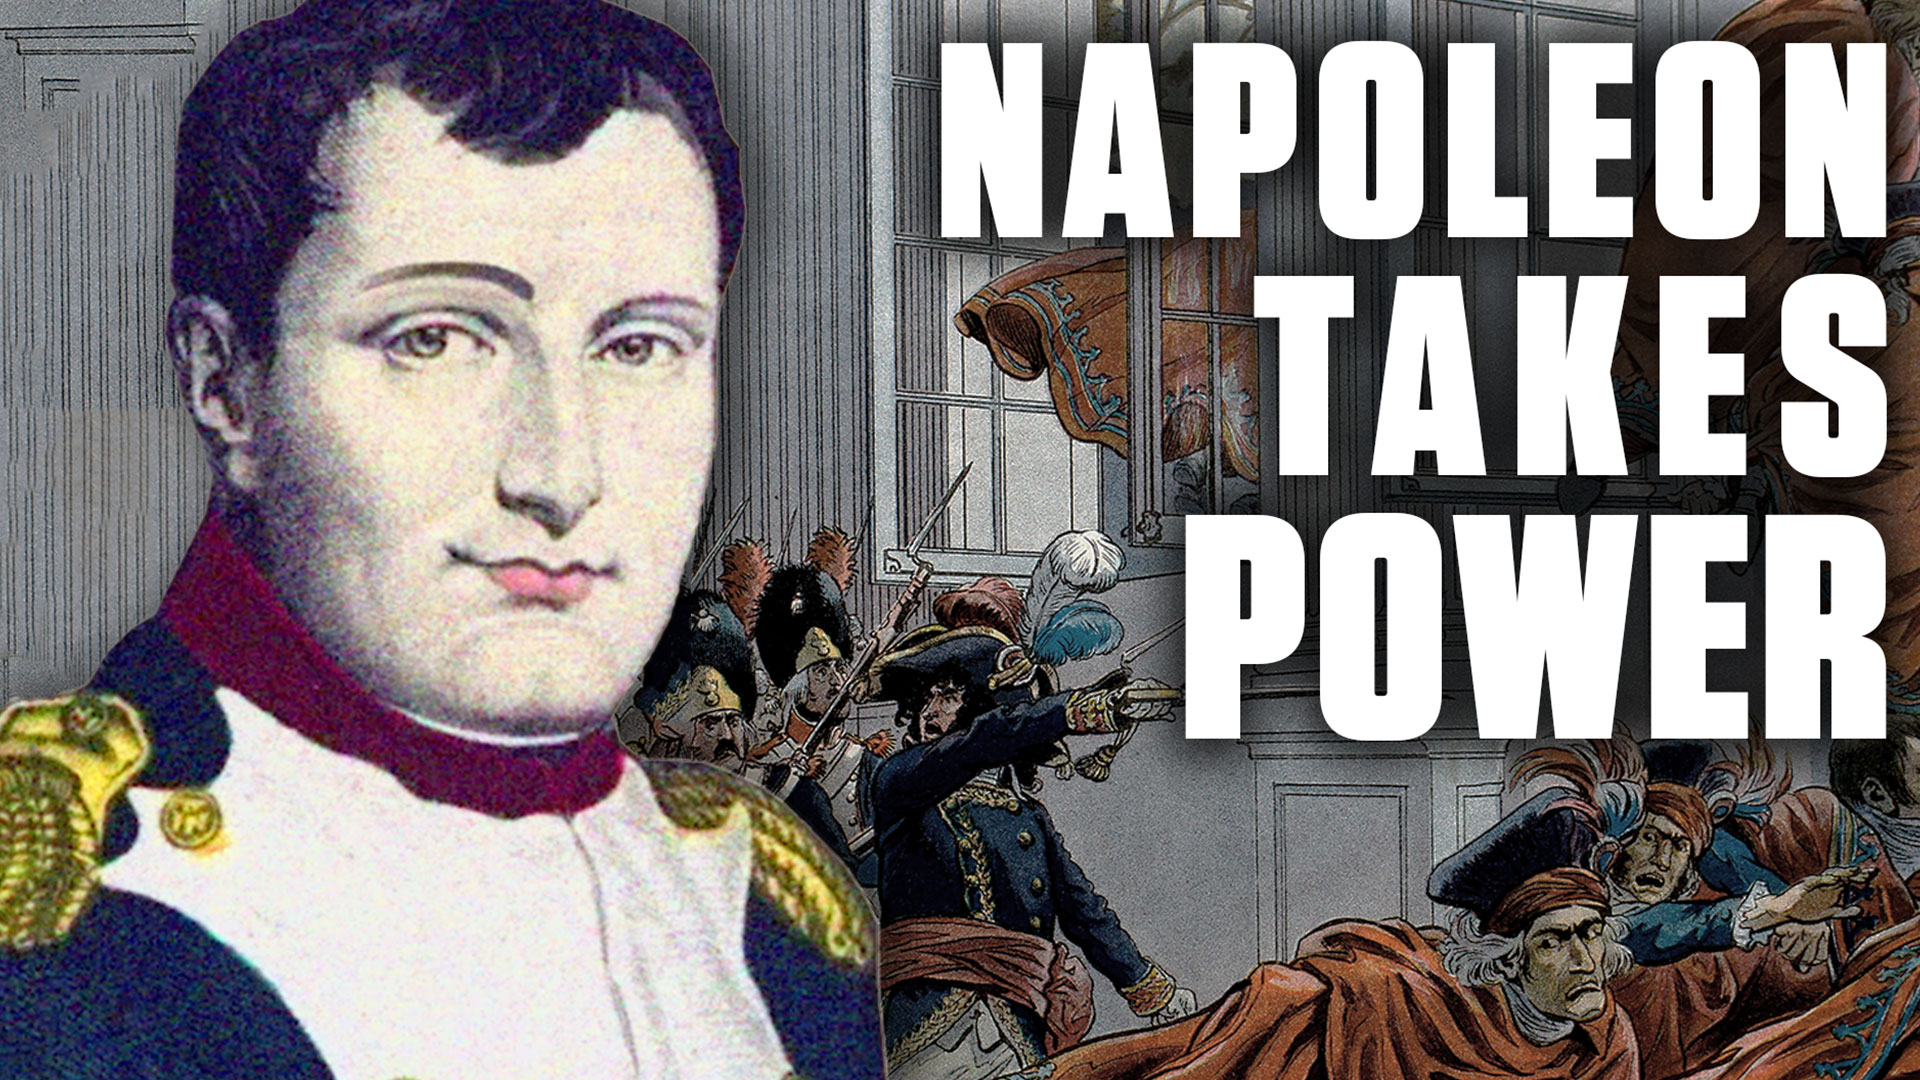 The French Are Not Happy About “Napoleon”